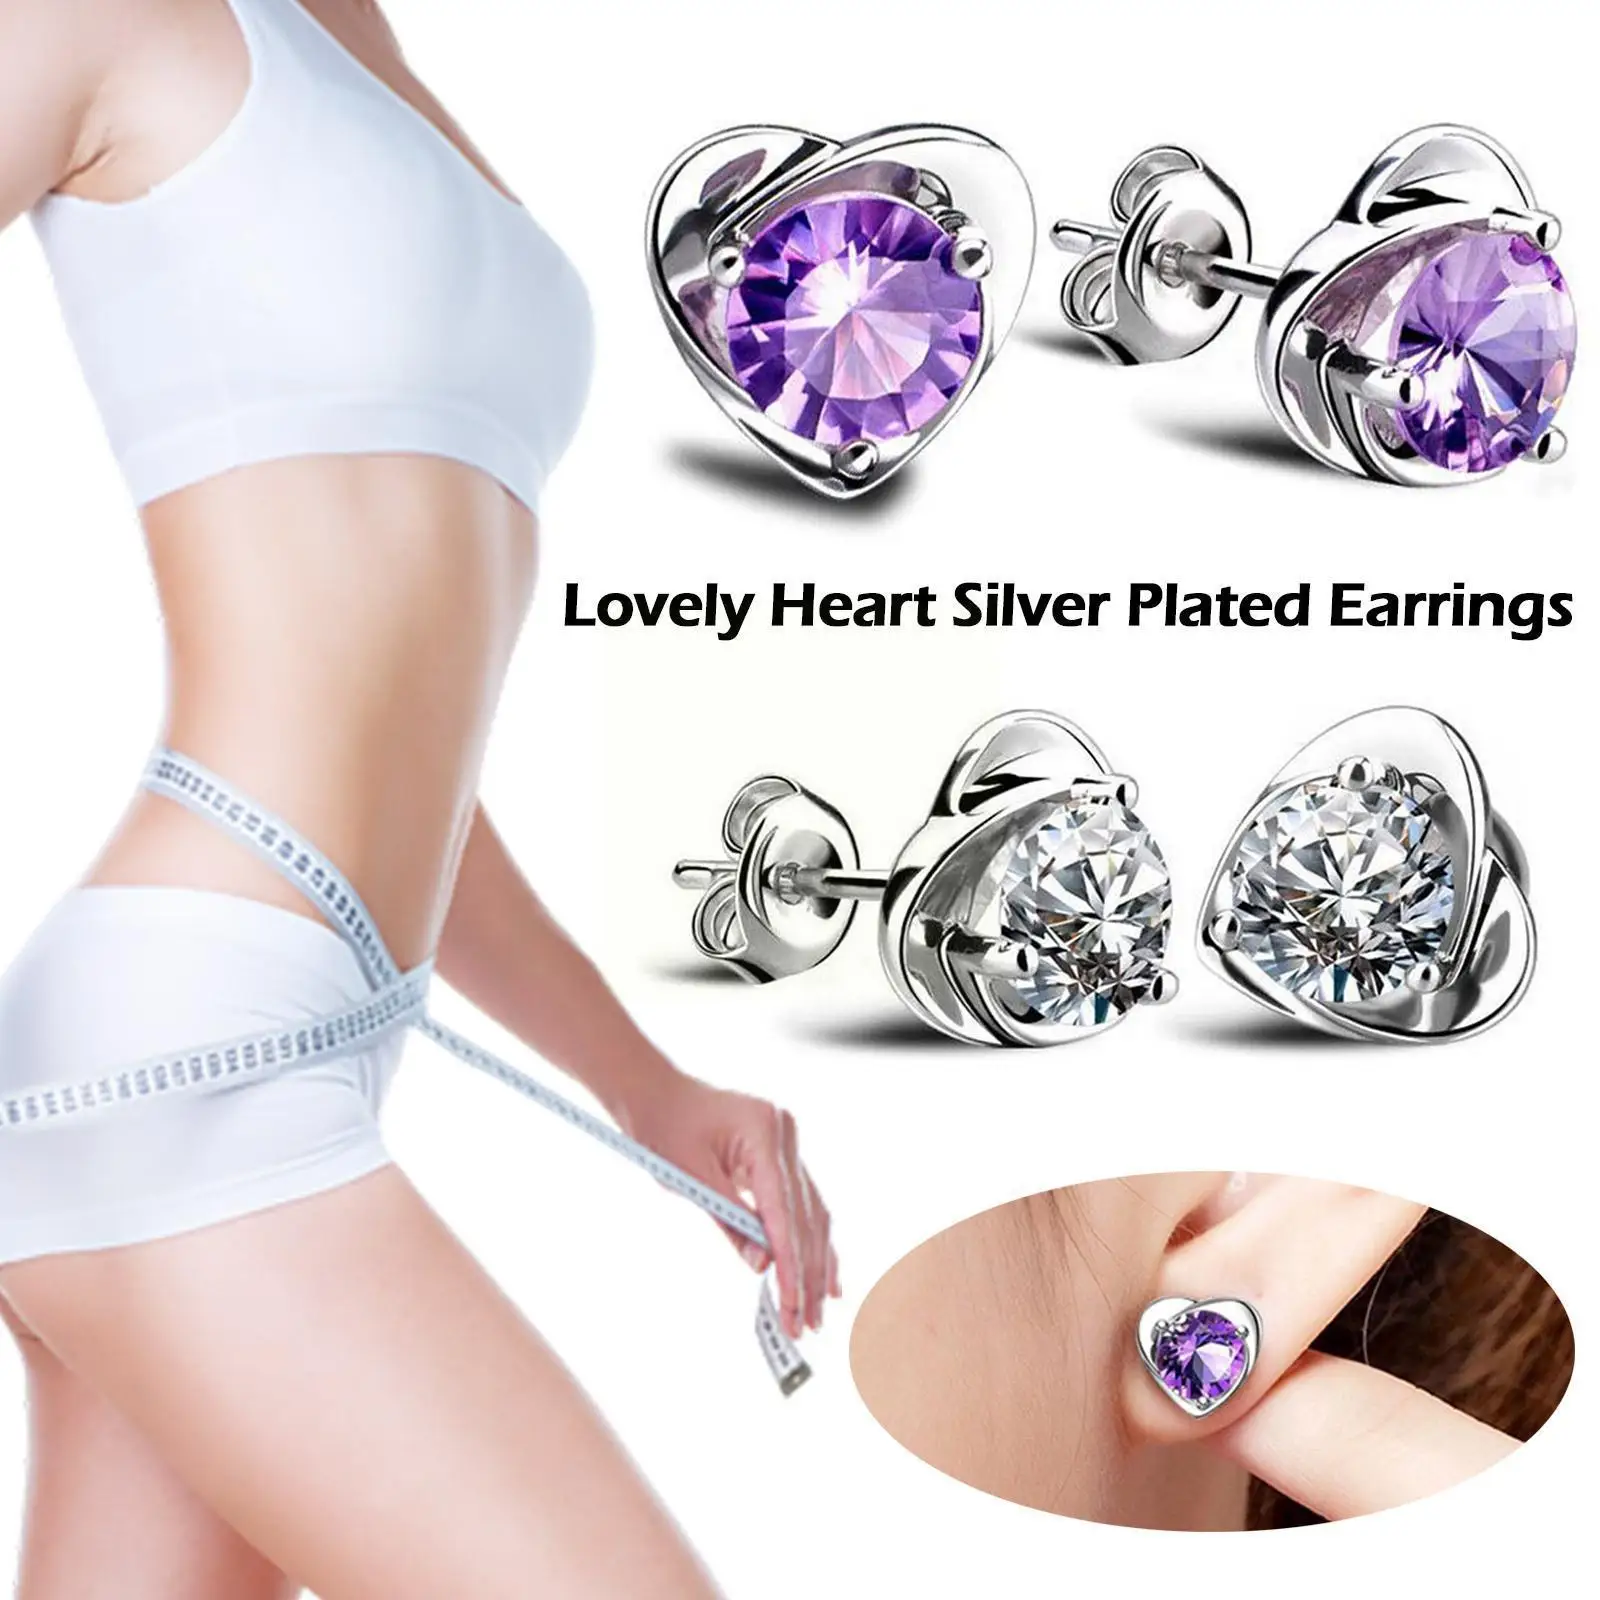 Slimming Jewelry Magnetic Weight Loss